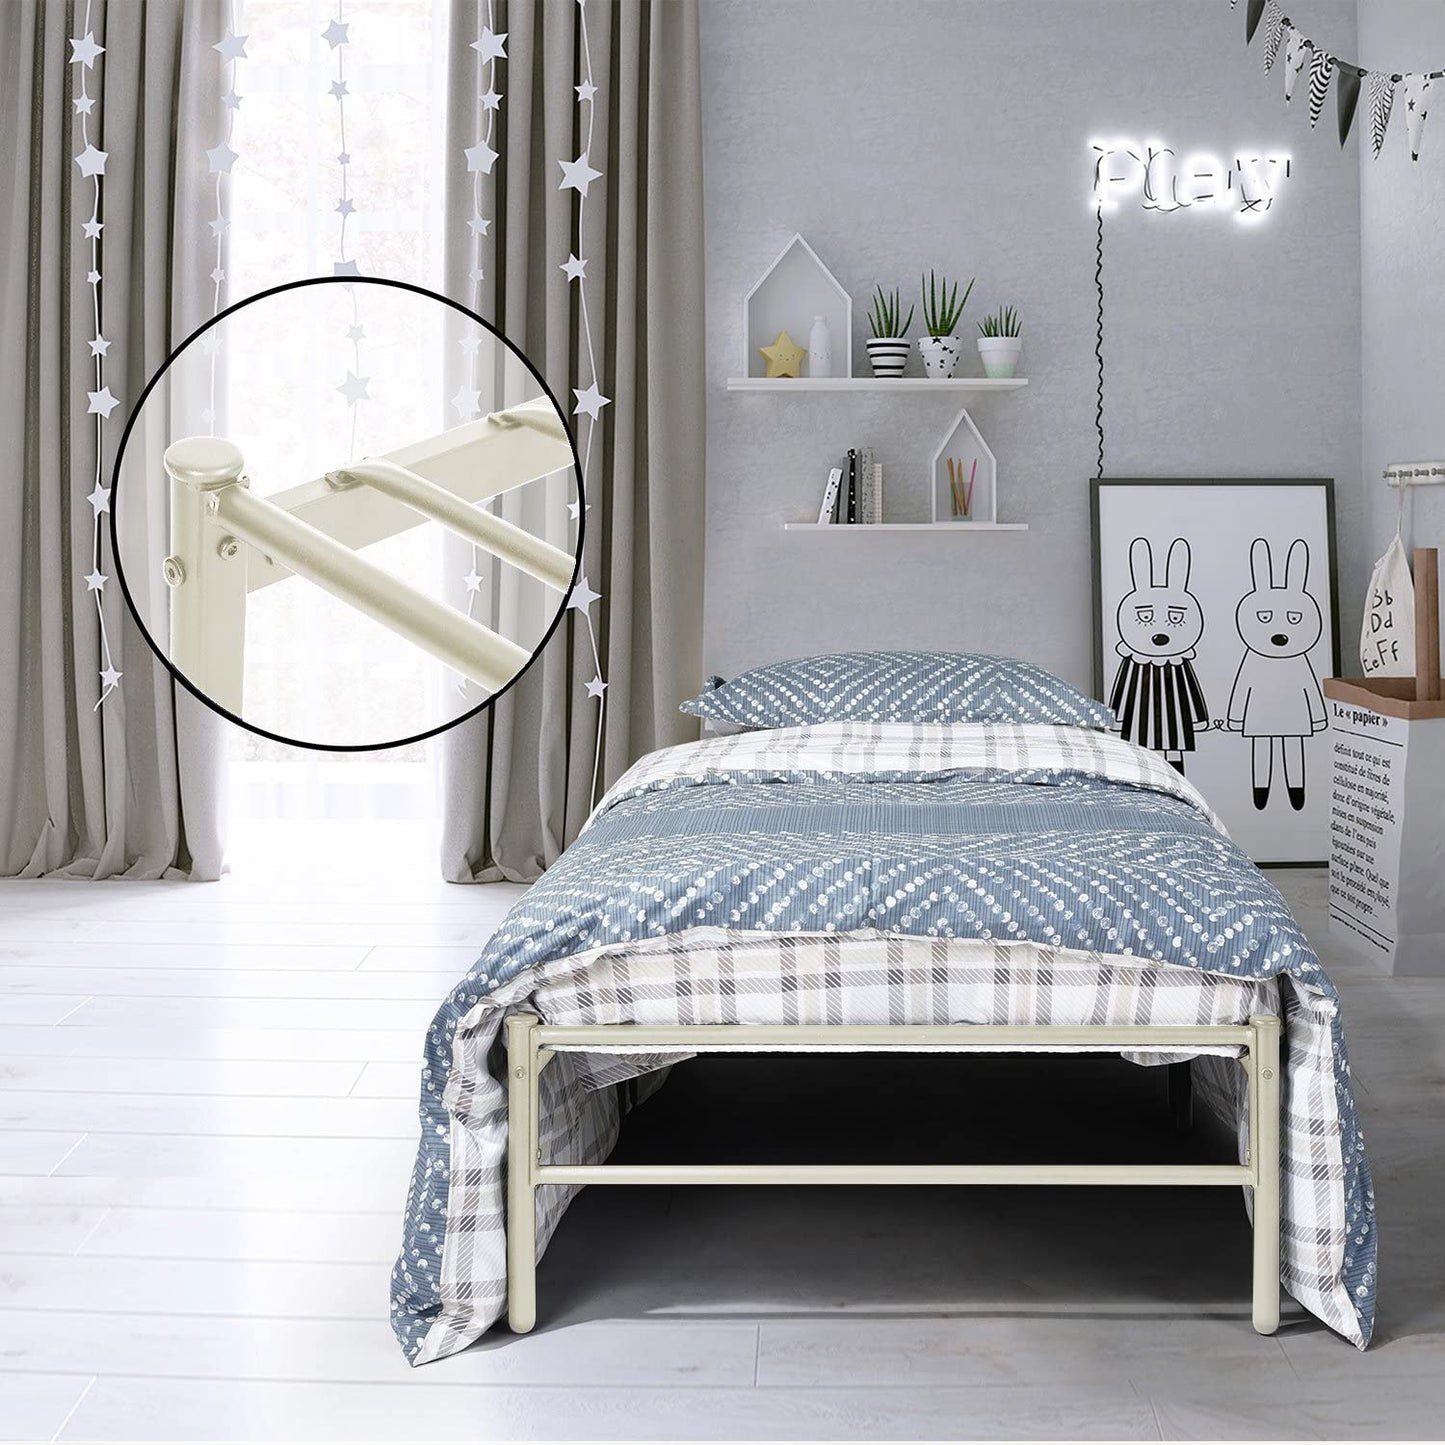 RUSSELL Single Metal Bed 94 * 196 cm - Black/White